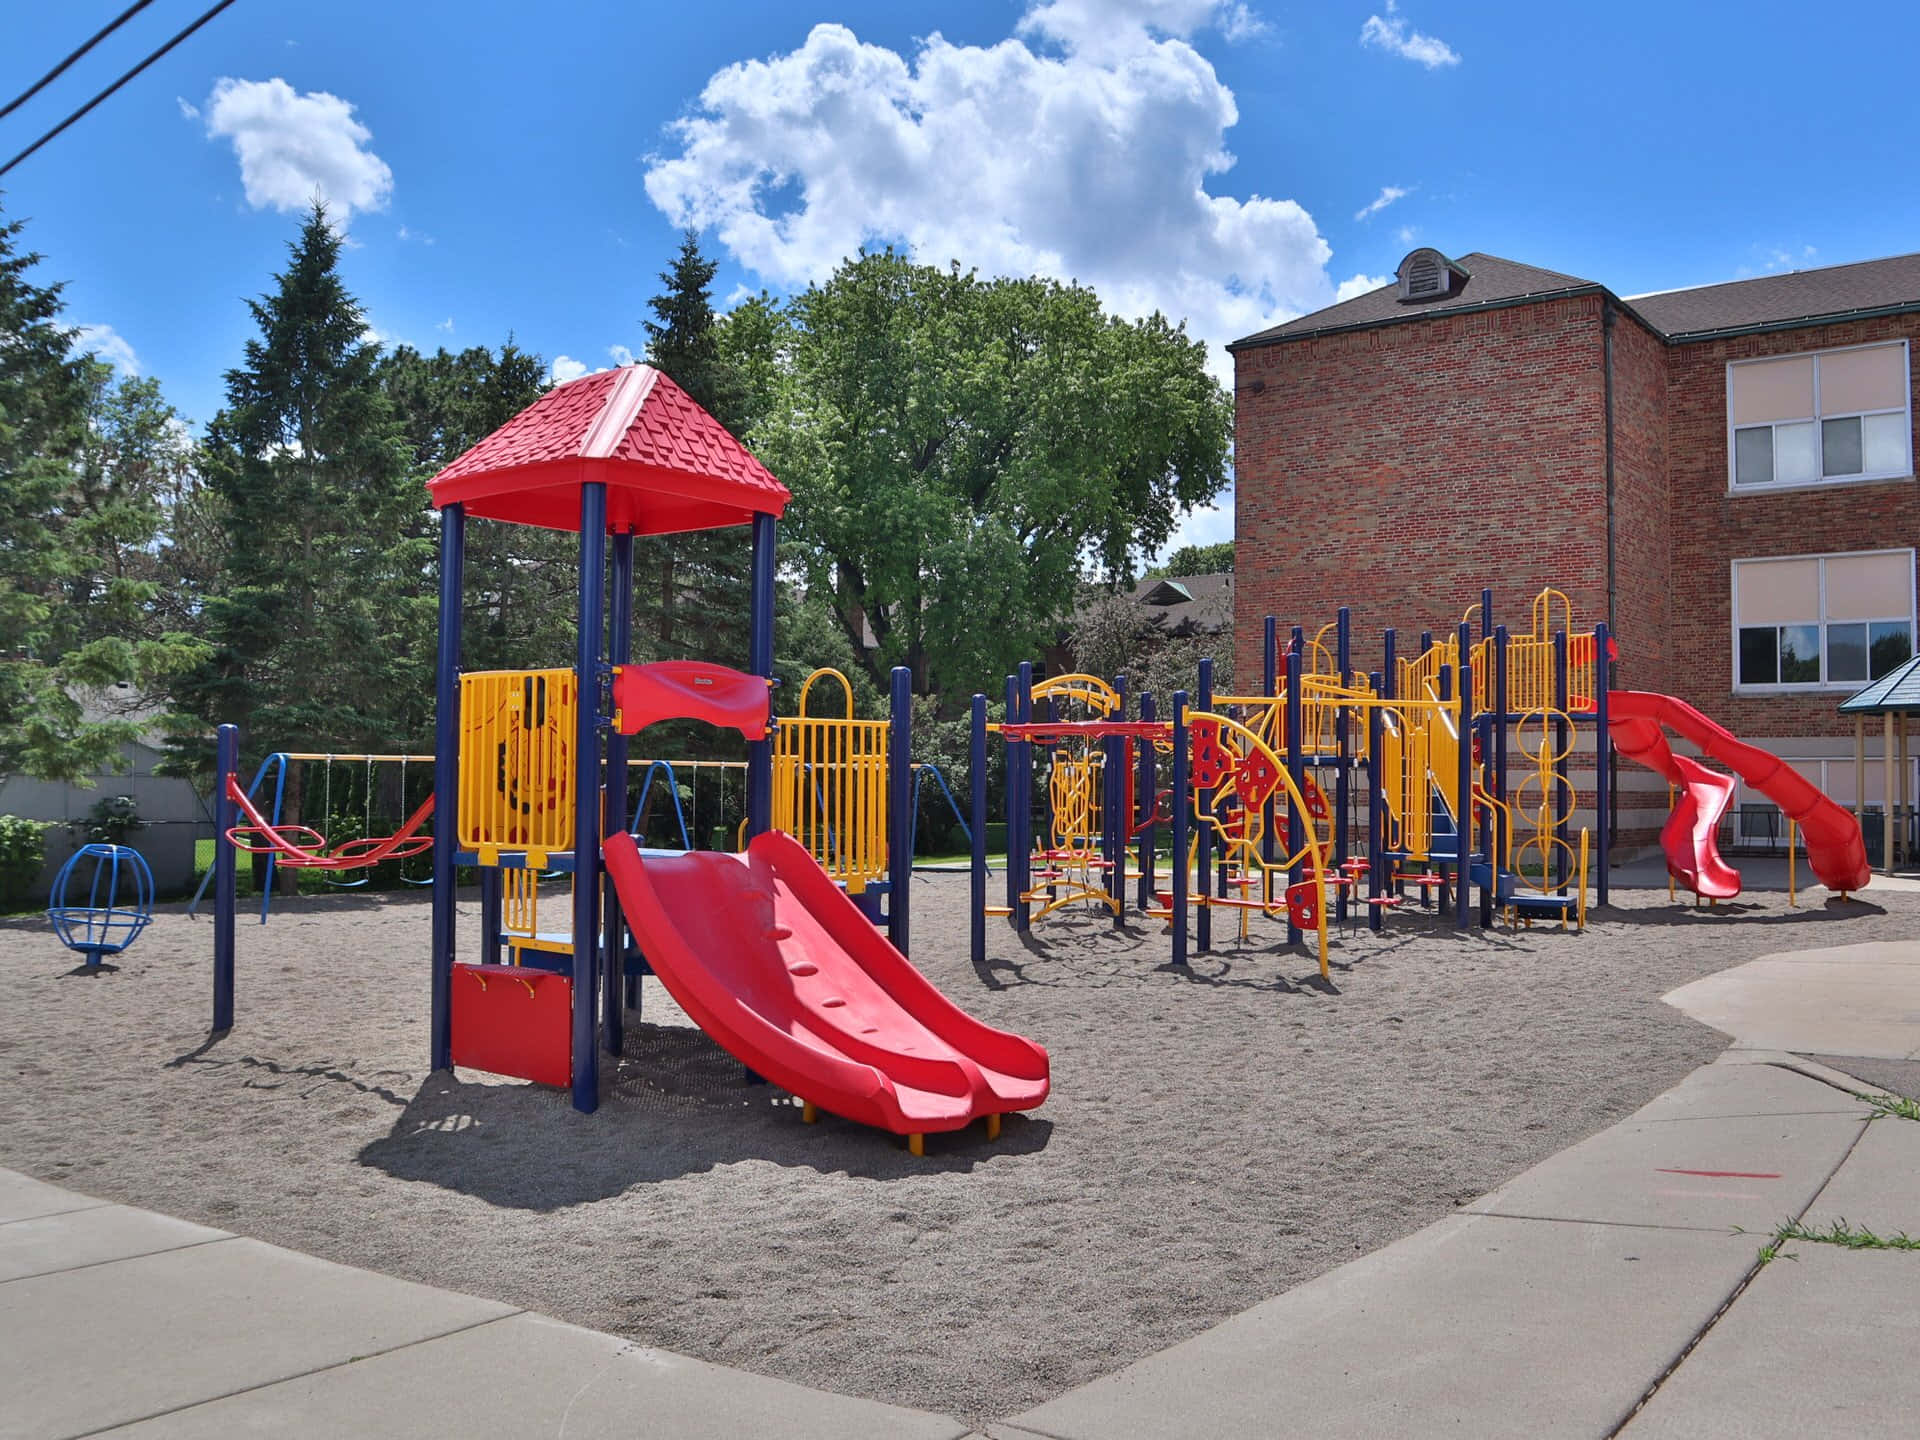 A colorful playground with slides and climbers on a sunny day